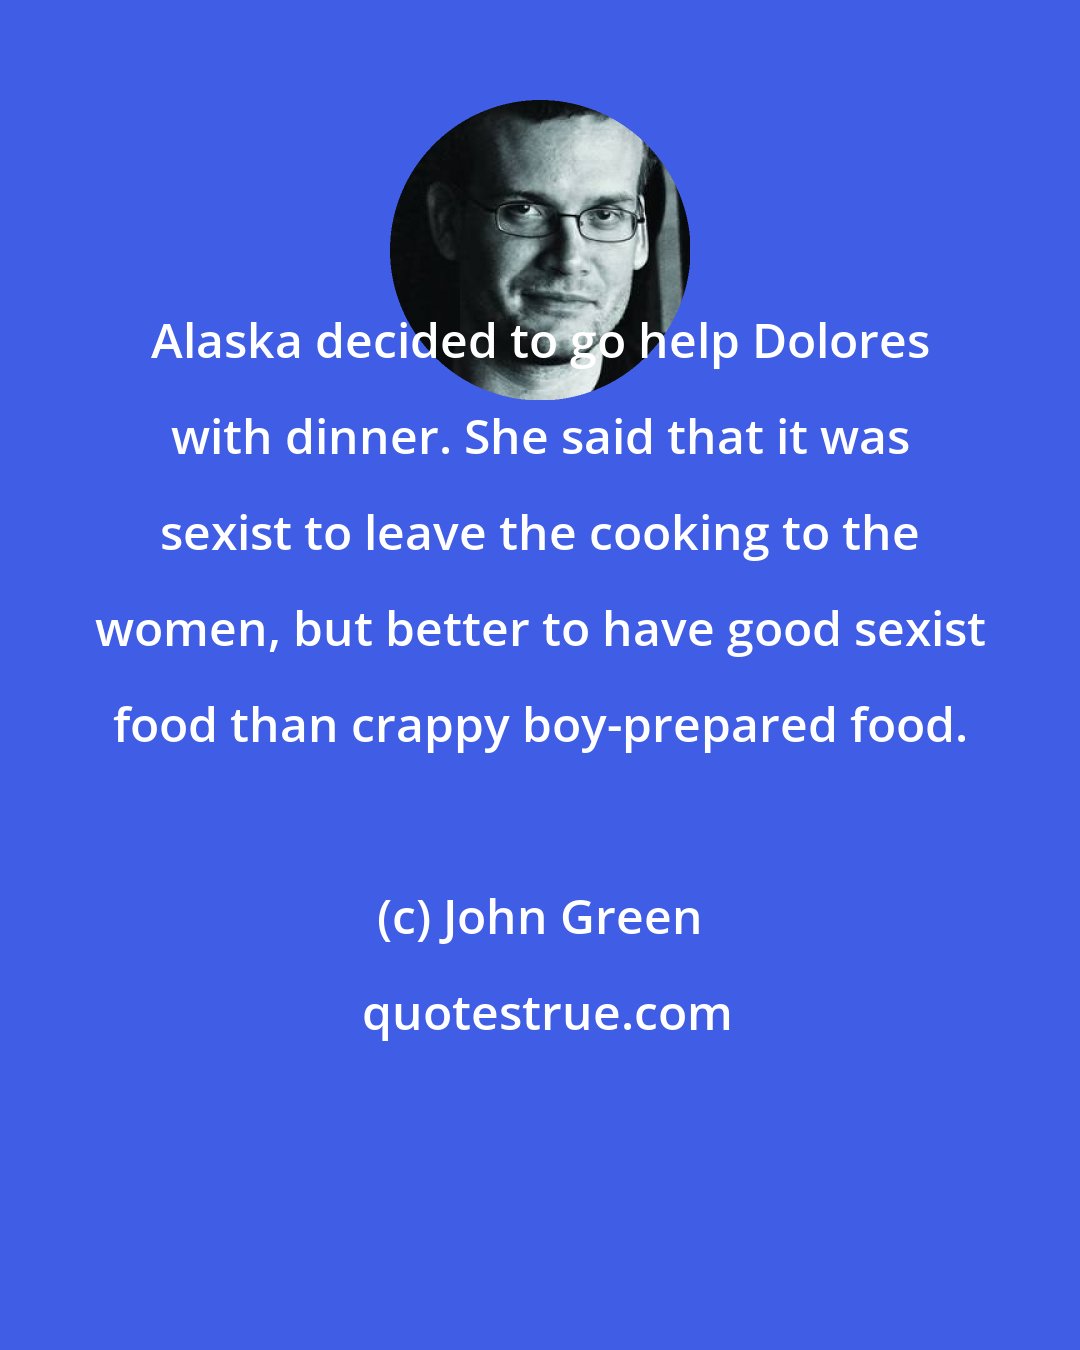 John Green: Alaska decided to go help Dolores with dinner. She said that it was sexist to leave the cooking to the women, but better to have good sexist food than crappy boy-prepared food.